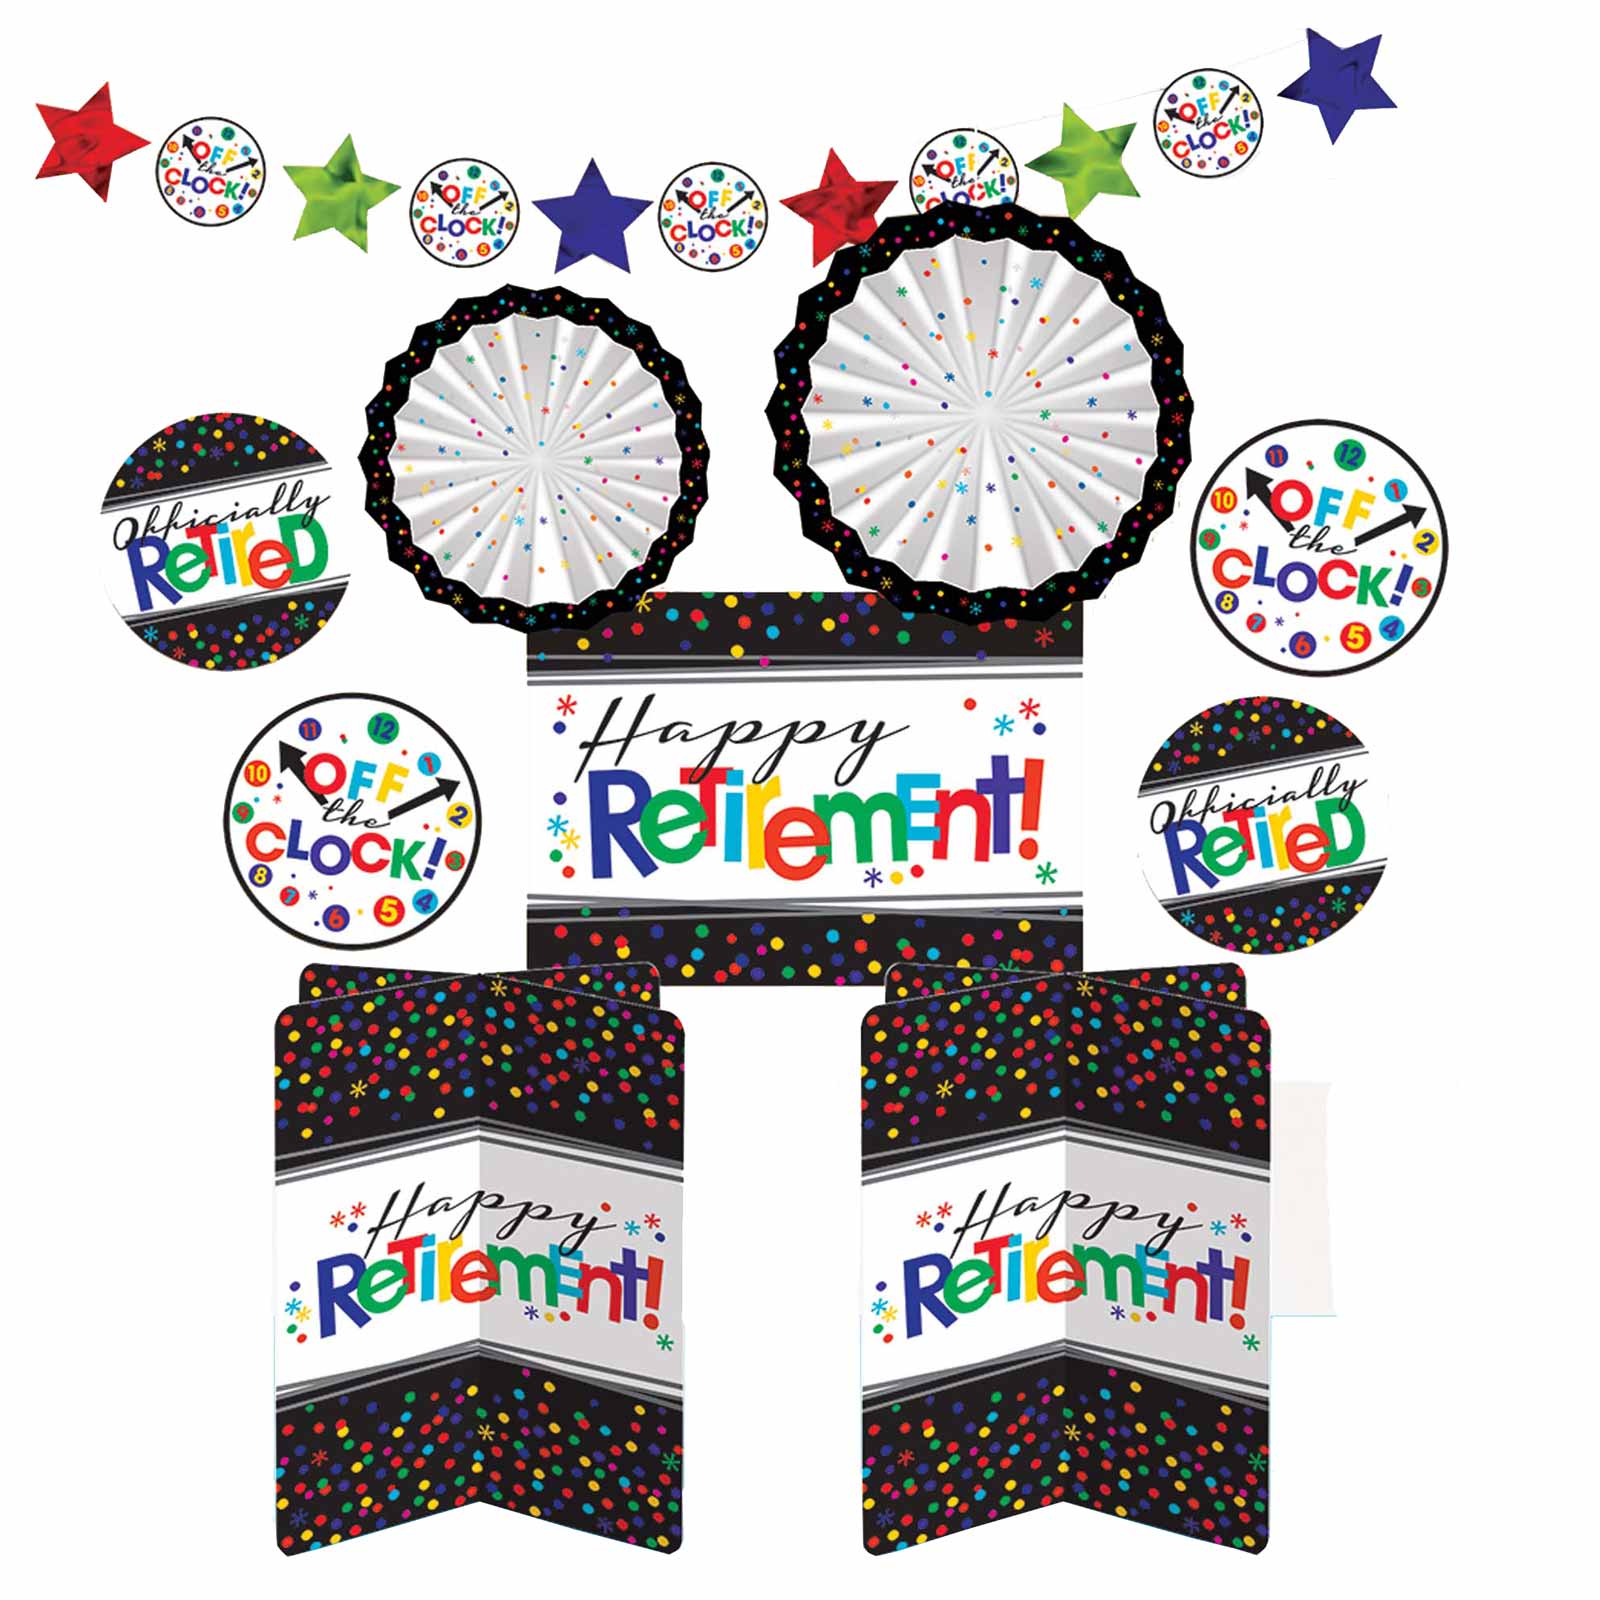 Officially Retired Room Decorating Kit Decorations - Party Centre